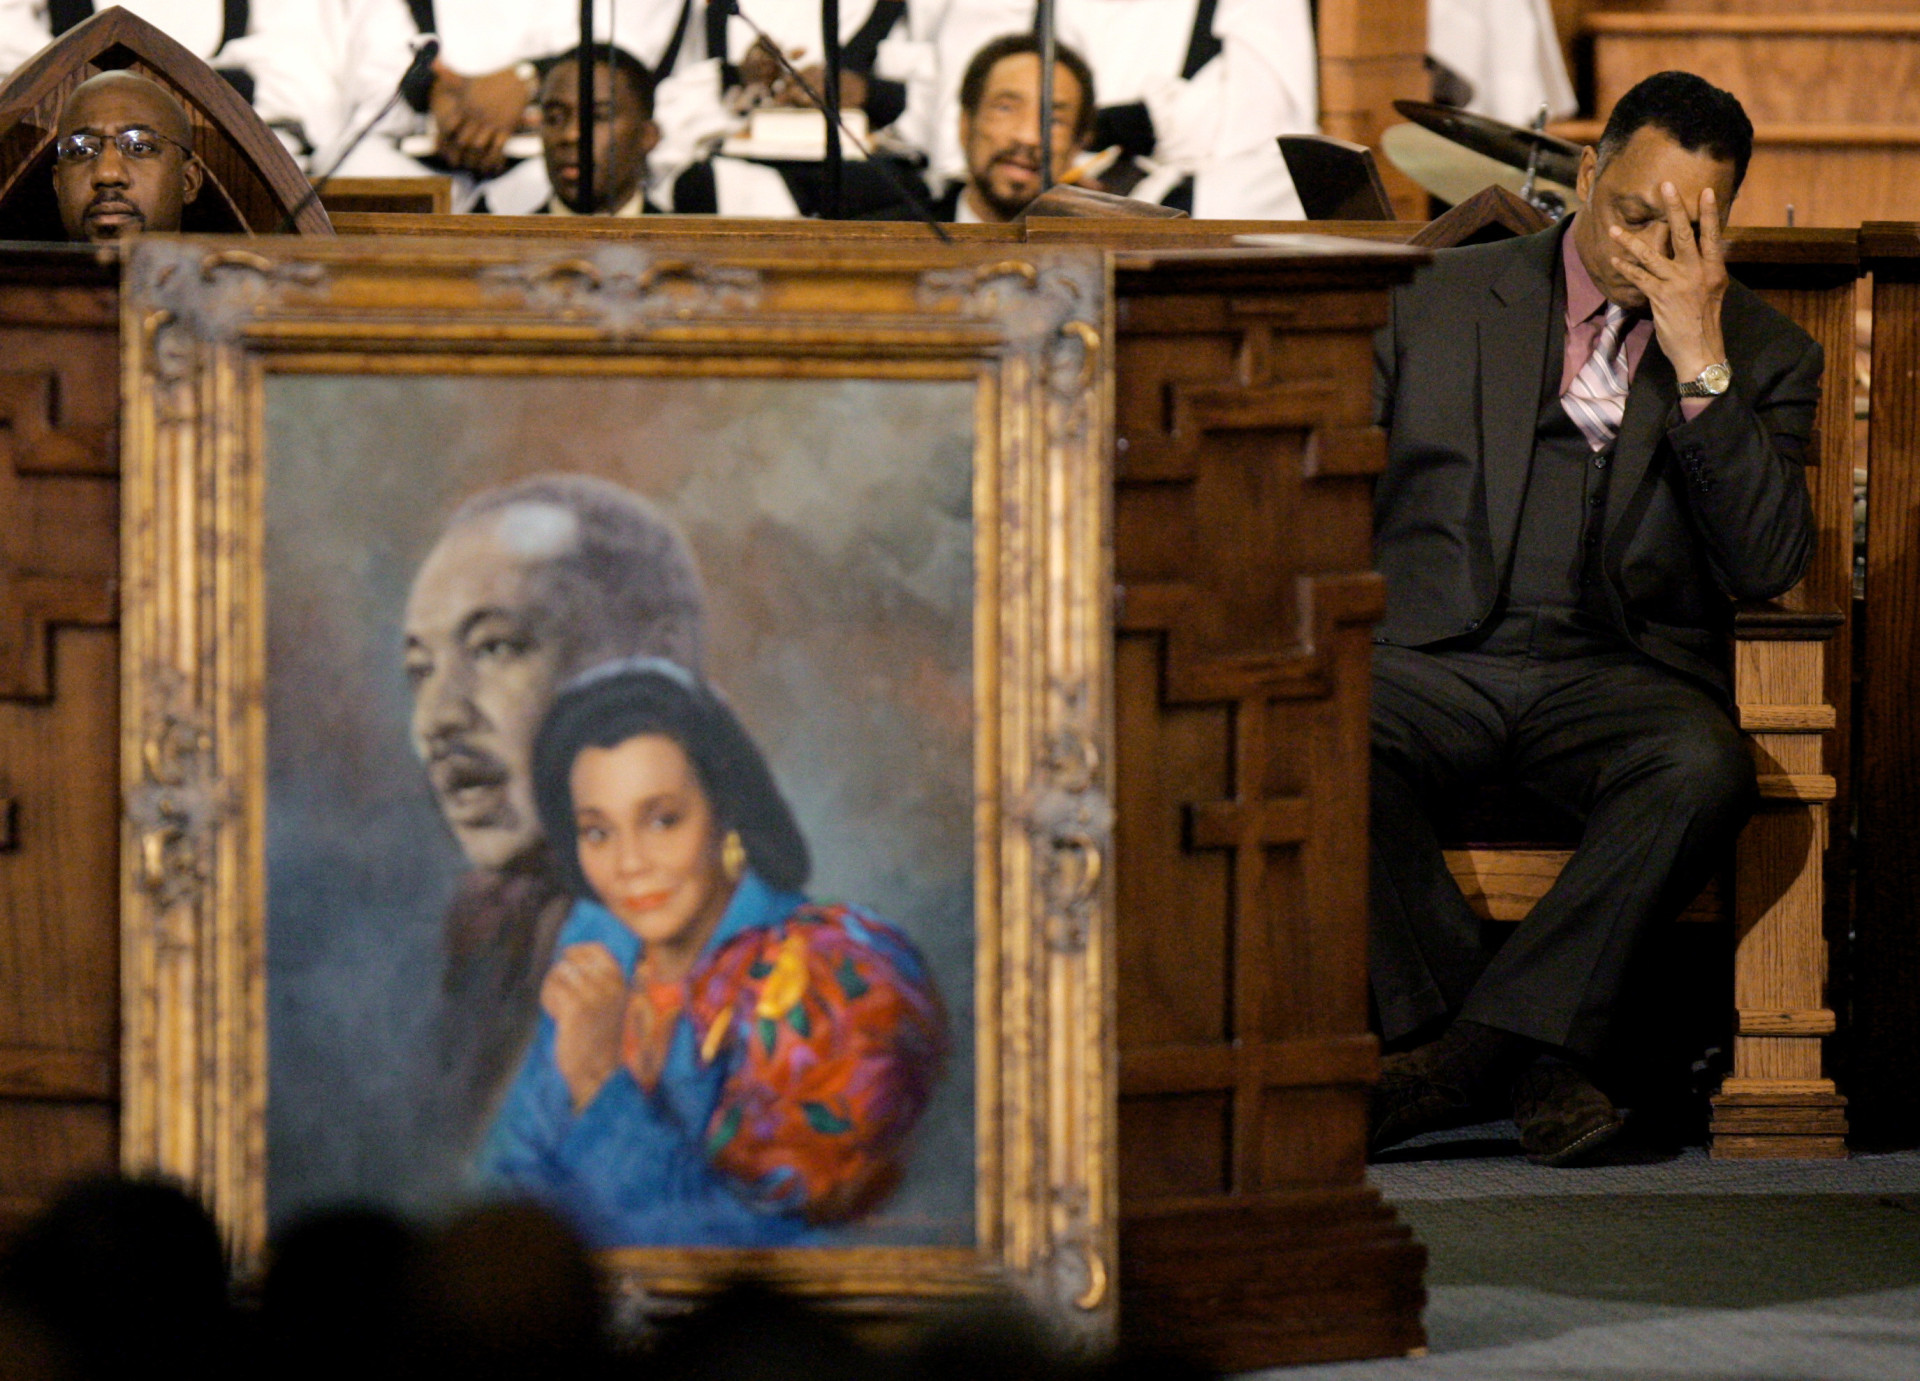 Rev. Jesse Jackson was clearly upset at her passing.<p><a href="https://www.msn.com/en-us/community/channel/vid-7xx8mnucu55yw63we9va2gwr7uihbxwc68fxqp25x6tg4ftibpra?cvid=94631541bc0f4f89bfd59158d696ad7e">Follow us and access great exclusive content every day</a></p>